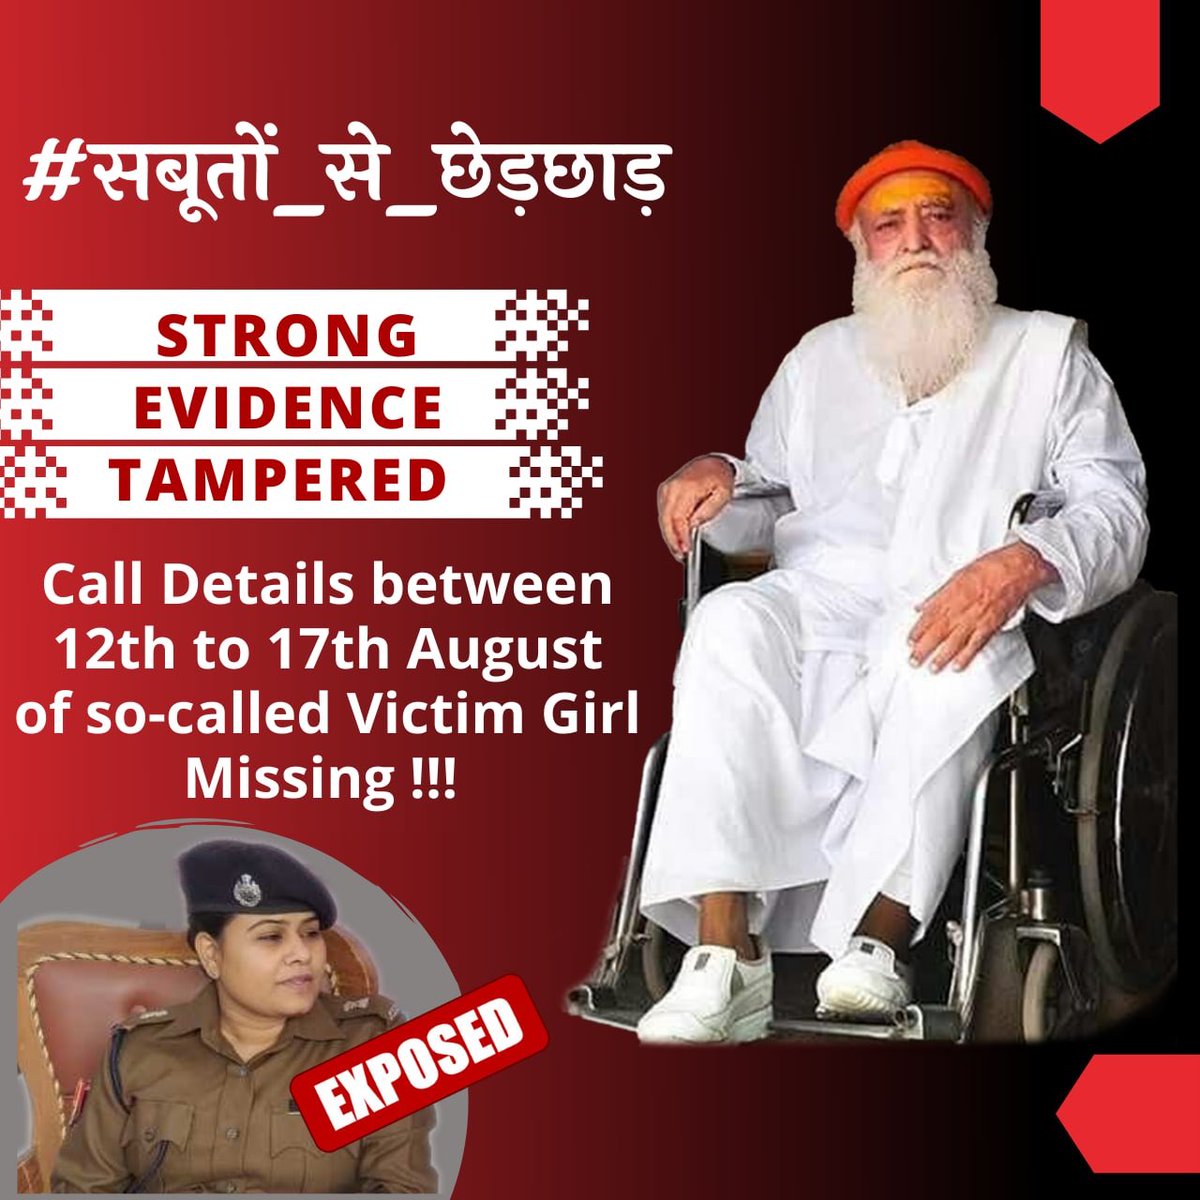 Here Me, Hakikat VS Kahani on Sant Shri Asharamji Bapu case

Completely fabricated case through misuse of POCSO Act as well as there is no truth in the allegations

Girl’s #CallDetailsSay Bapuji is Innocent